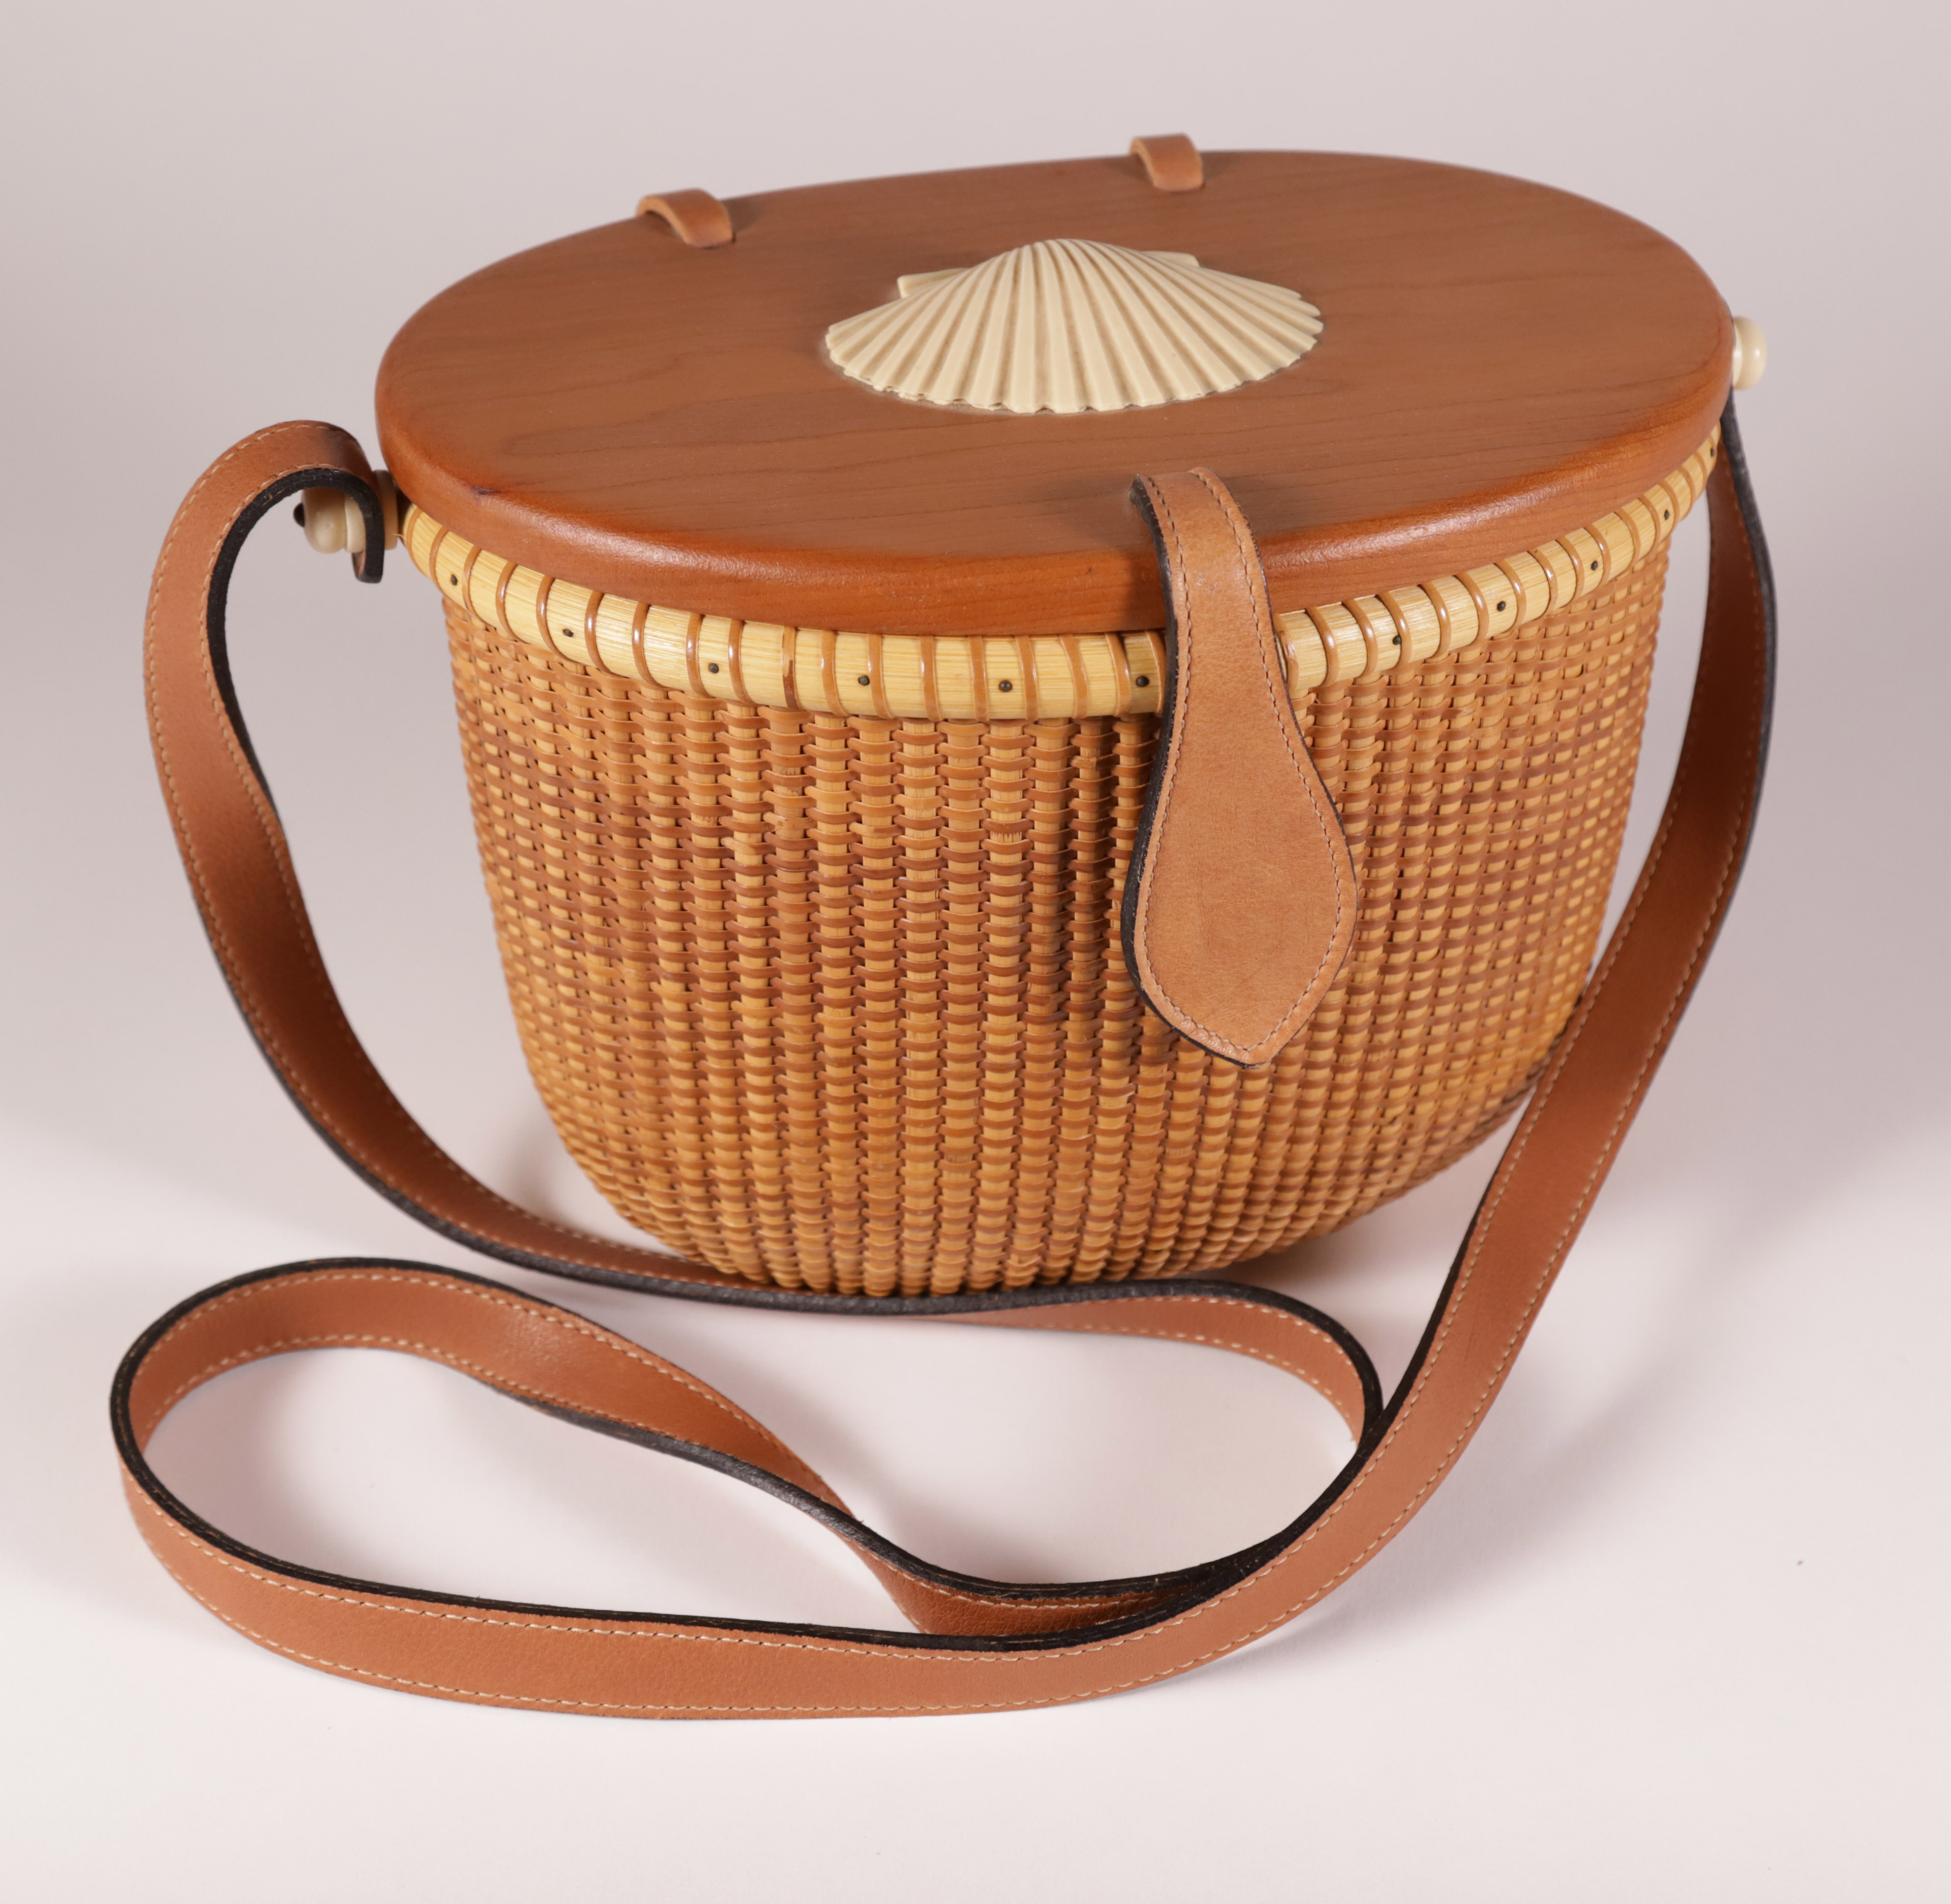 Nantucket Lightship Baskets: the Story Behind the Iconic Island  Collectibles - Cottage Journal